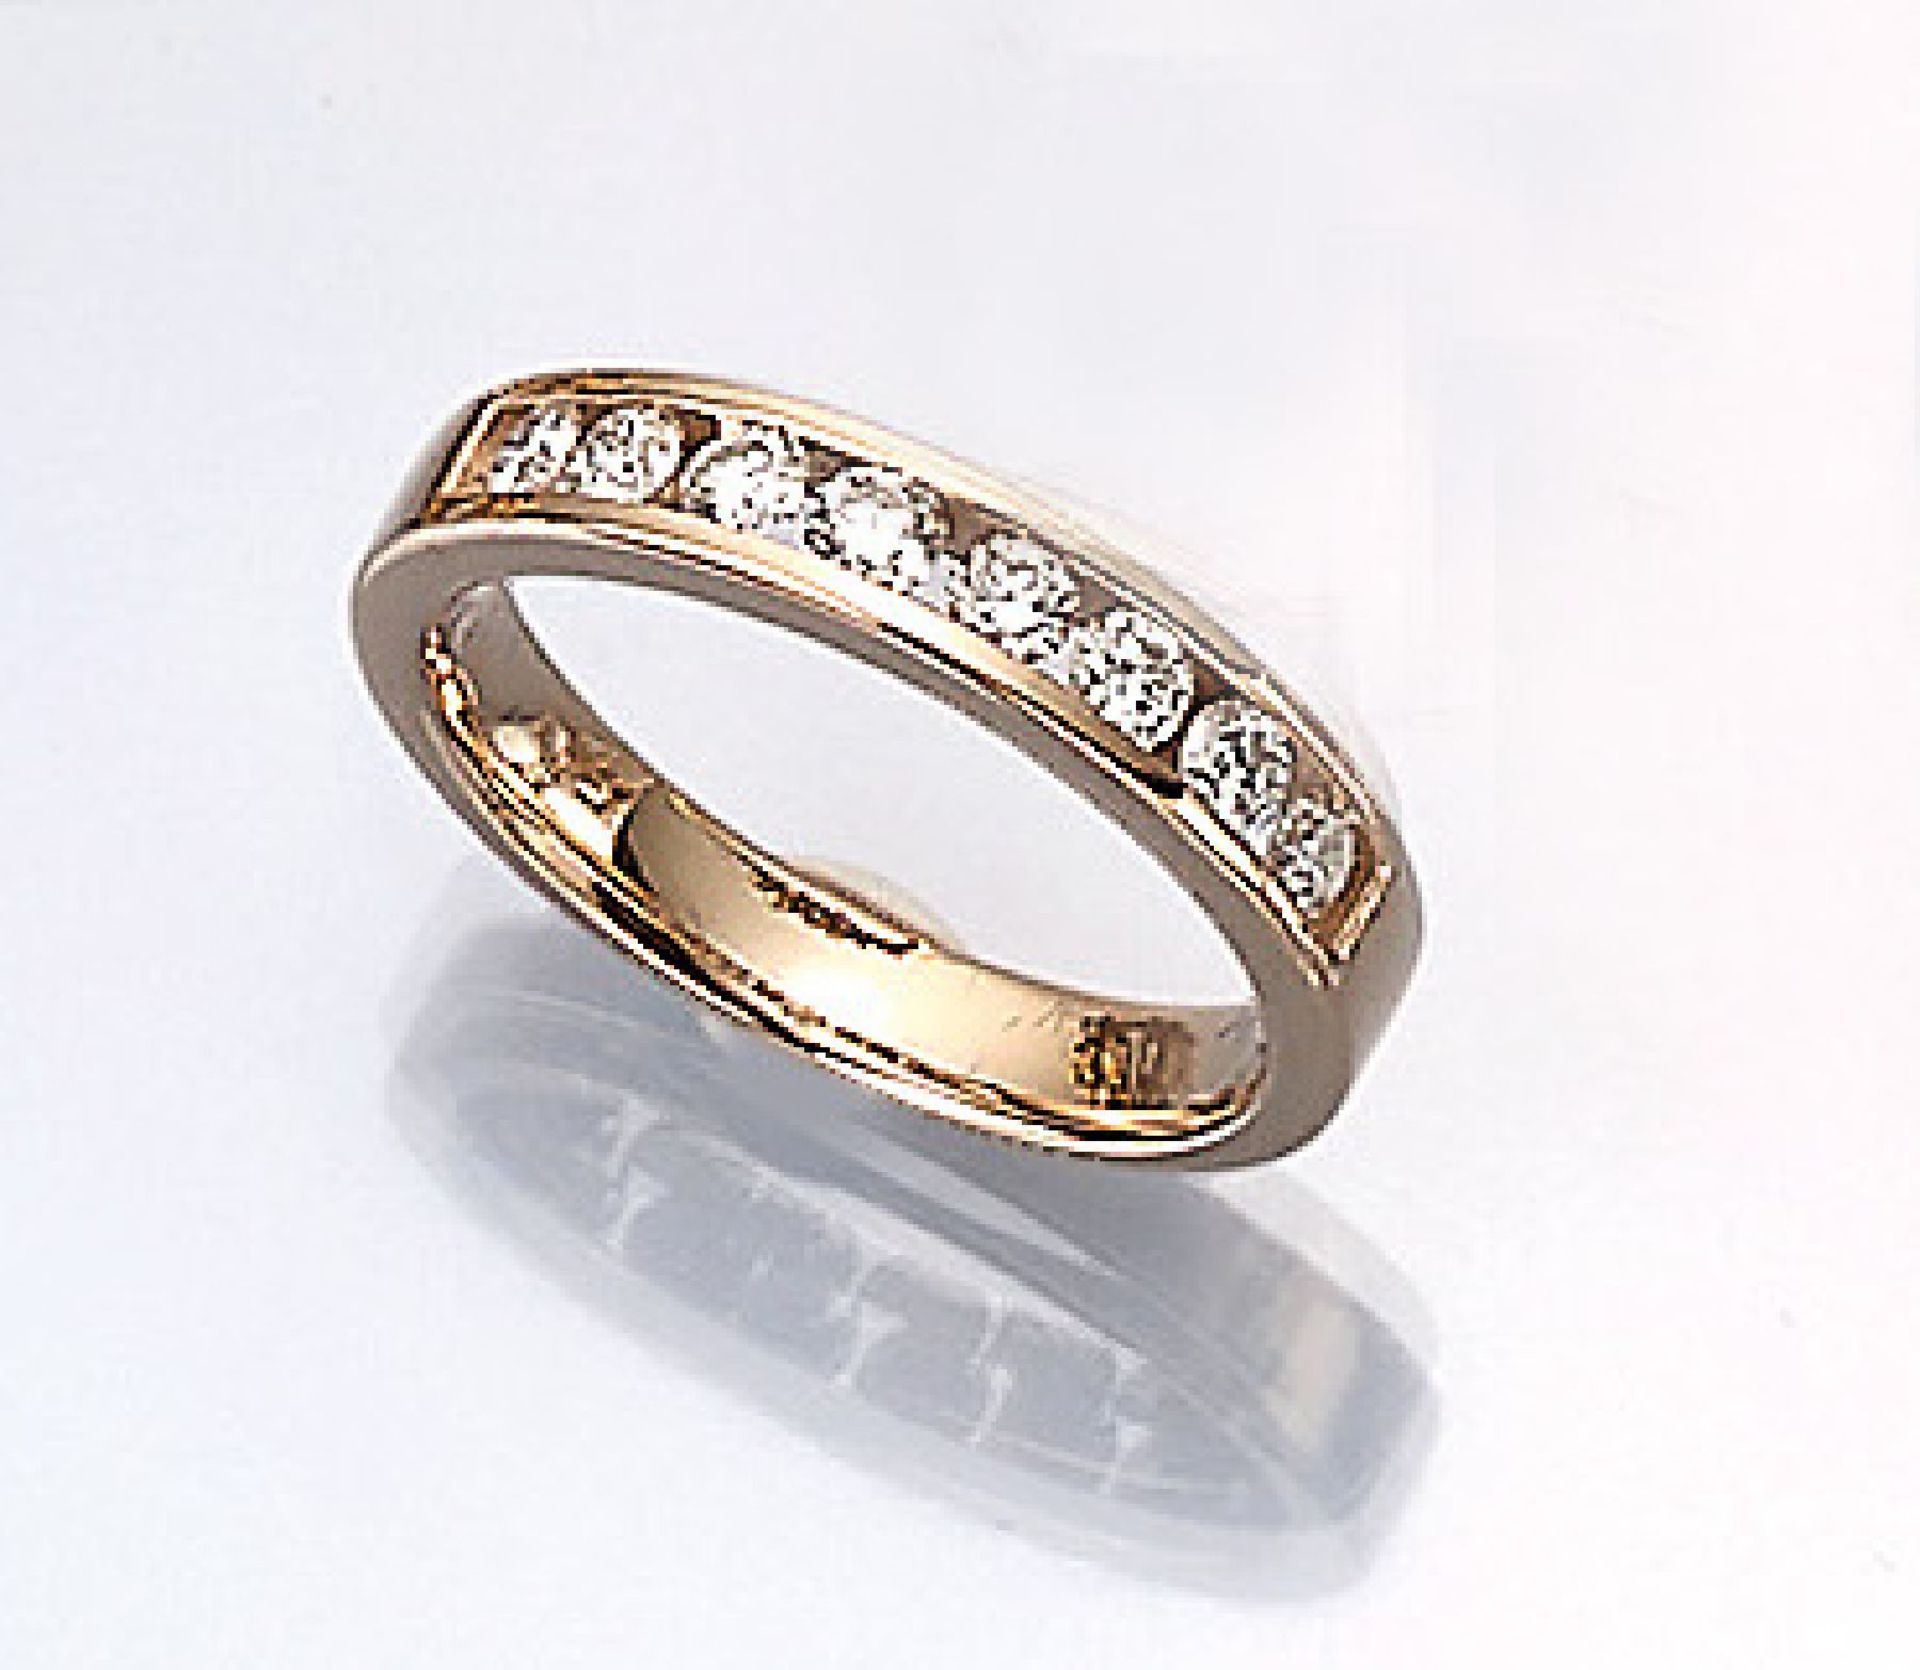 14 kt gold half memory ring with brilliants , YG 585/000, brilliants total approx. 0.40 ct